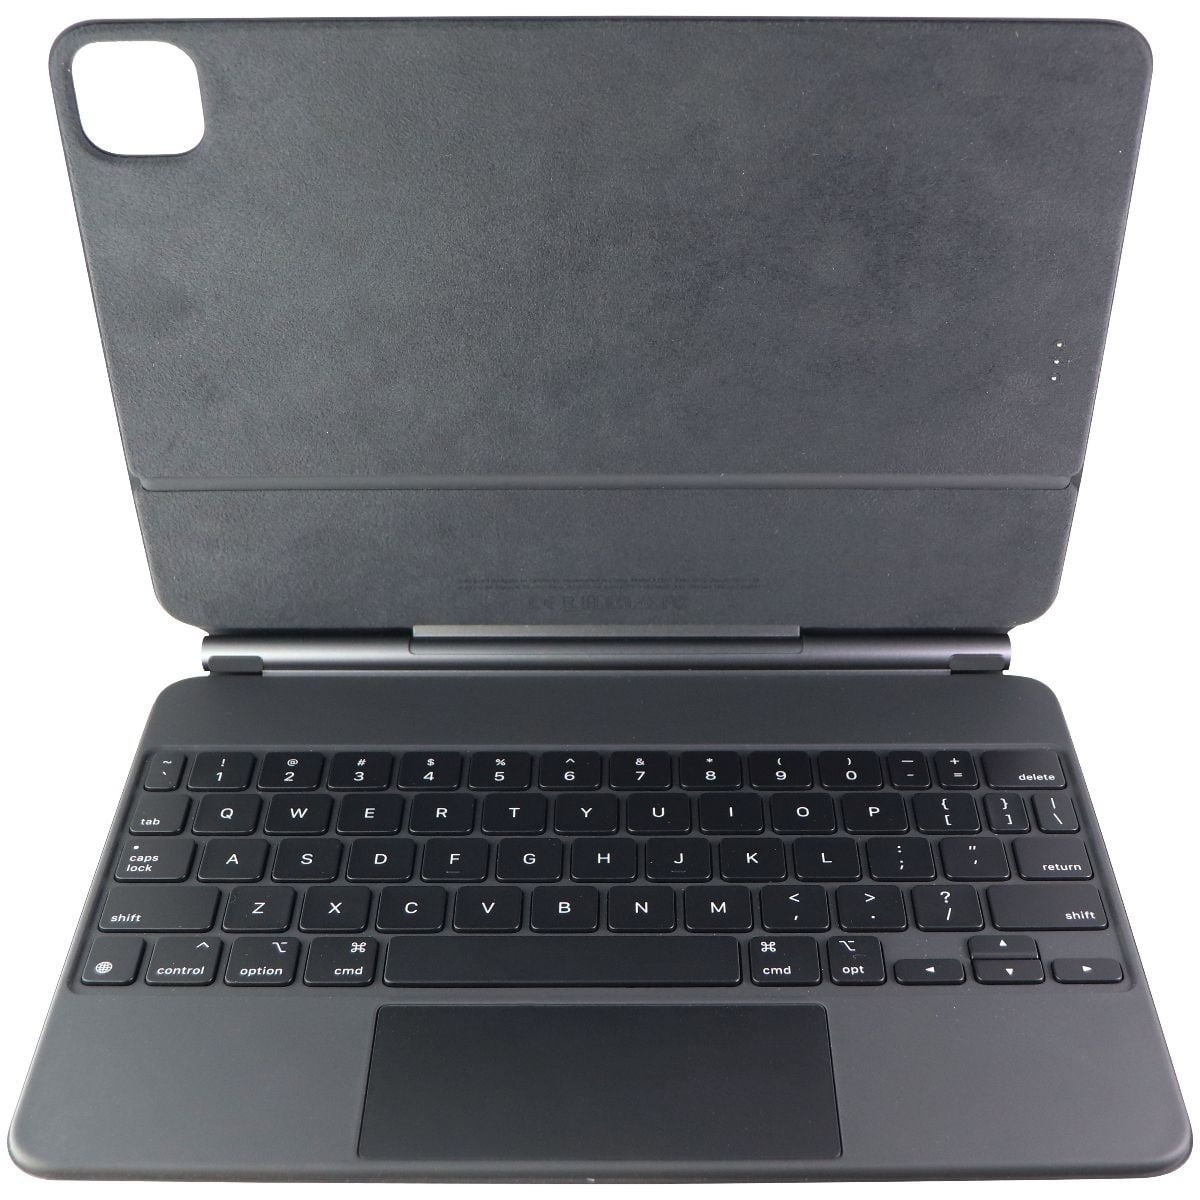 Magic Keyboard for iPad Pro 11-inch (4th generation) and iPad Air (5th  generation) - US English - Black ( iPad Not Included )